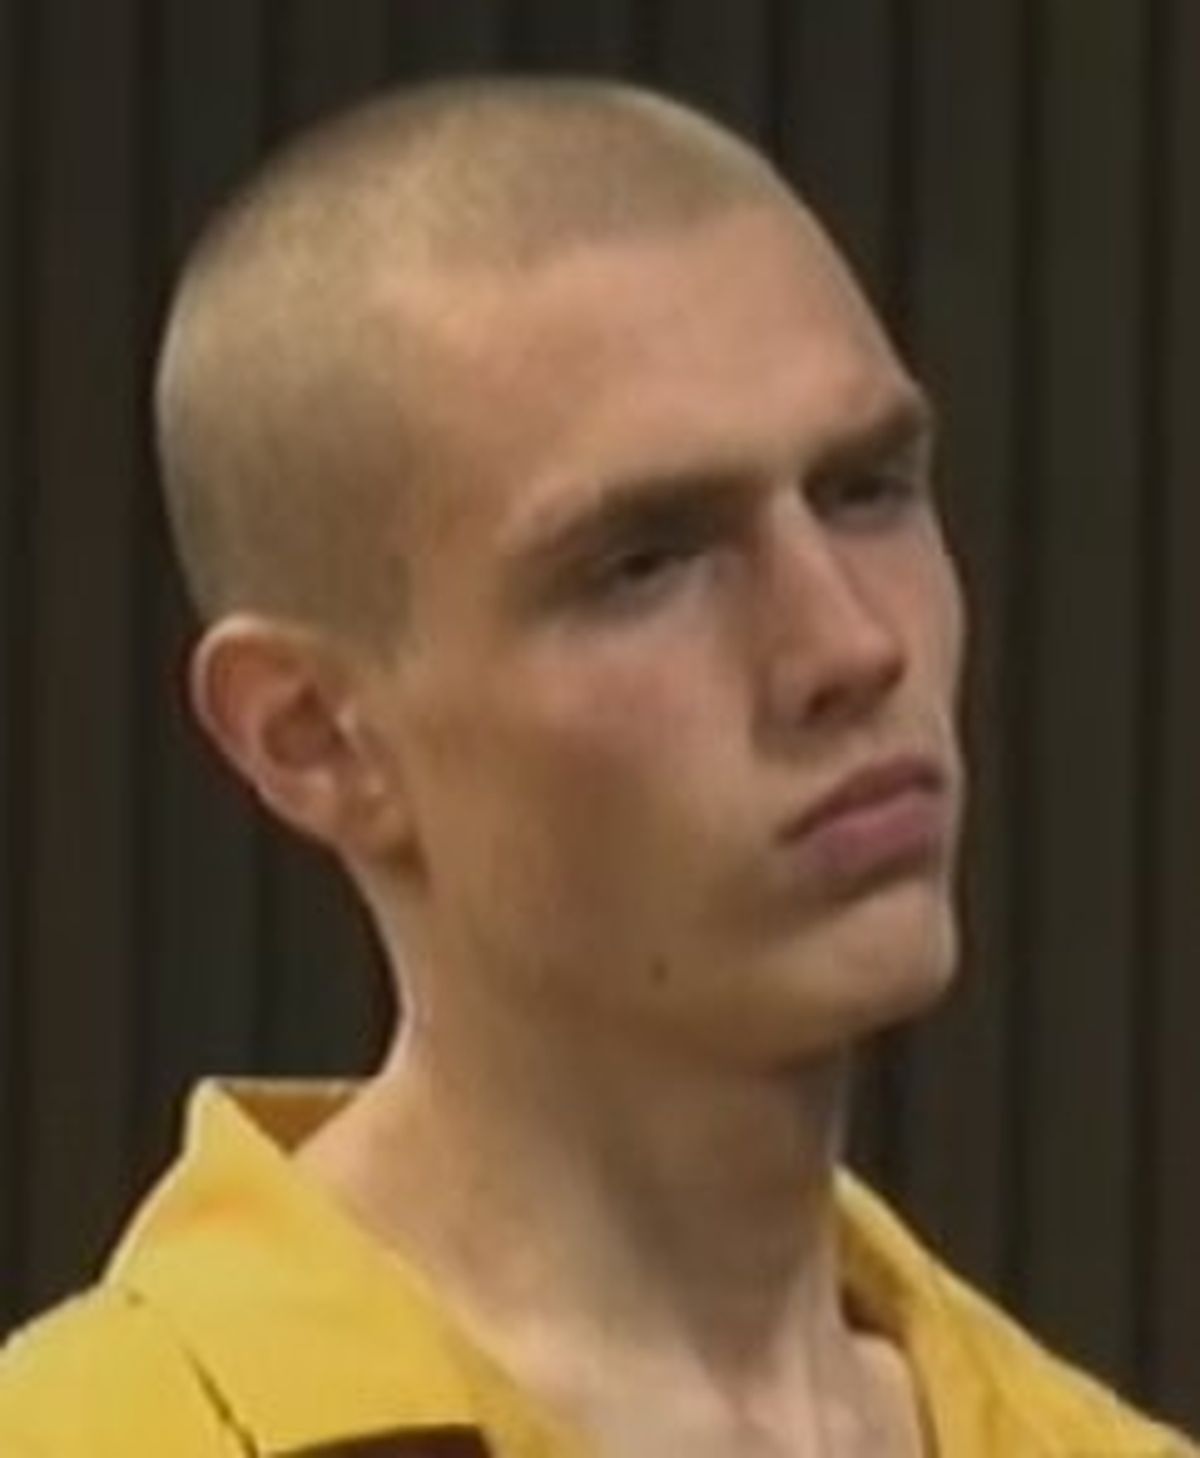 Murder suspect Justice E. Sims, 18, appears in court on April 18, 2011. (KHQ-TV)